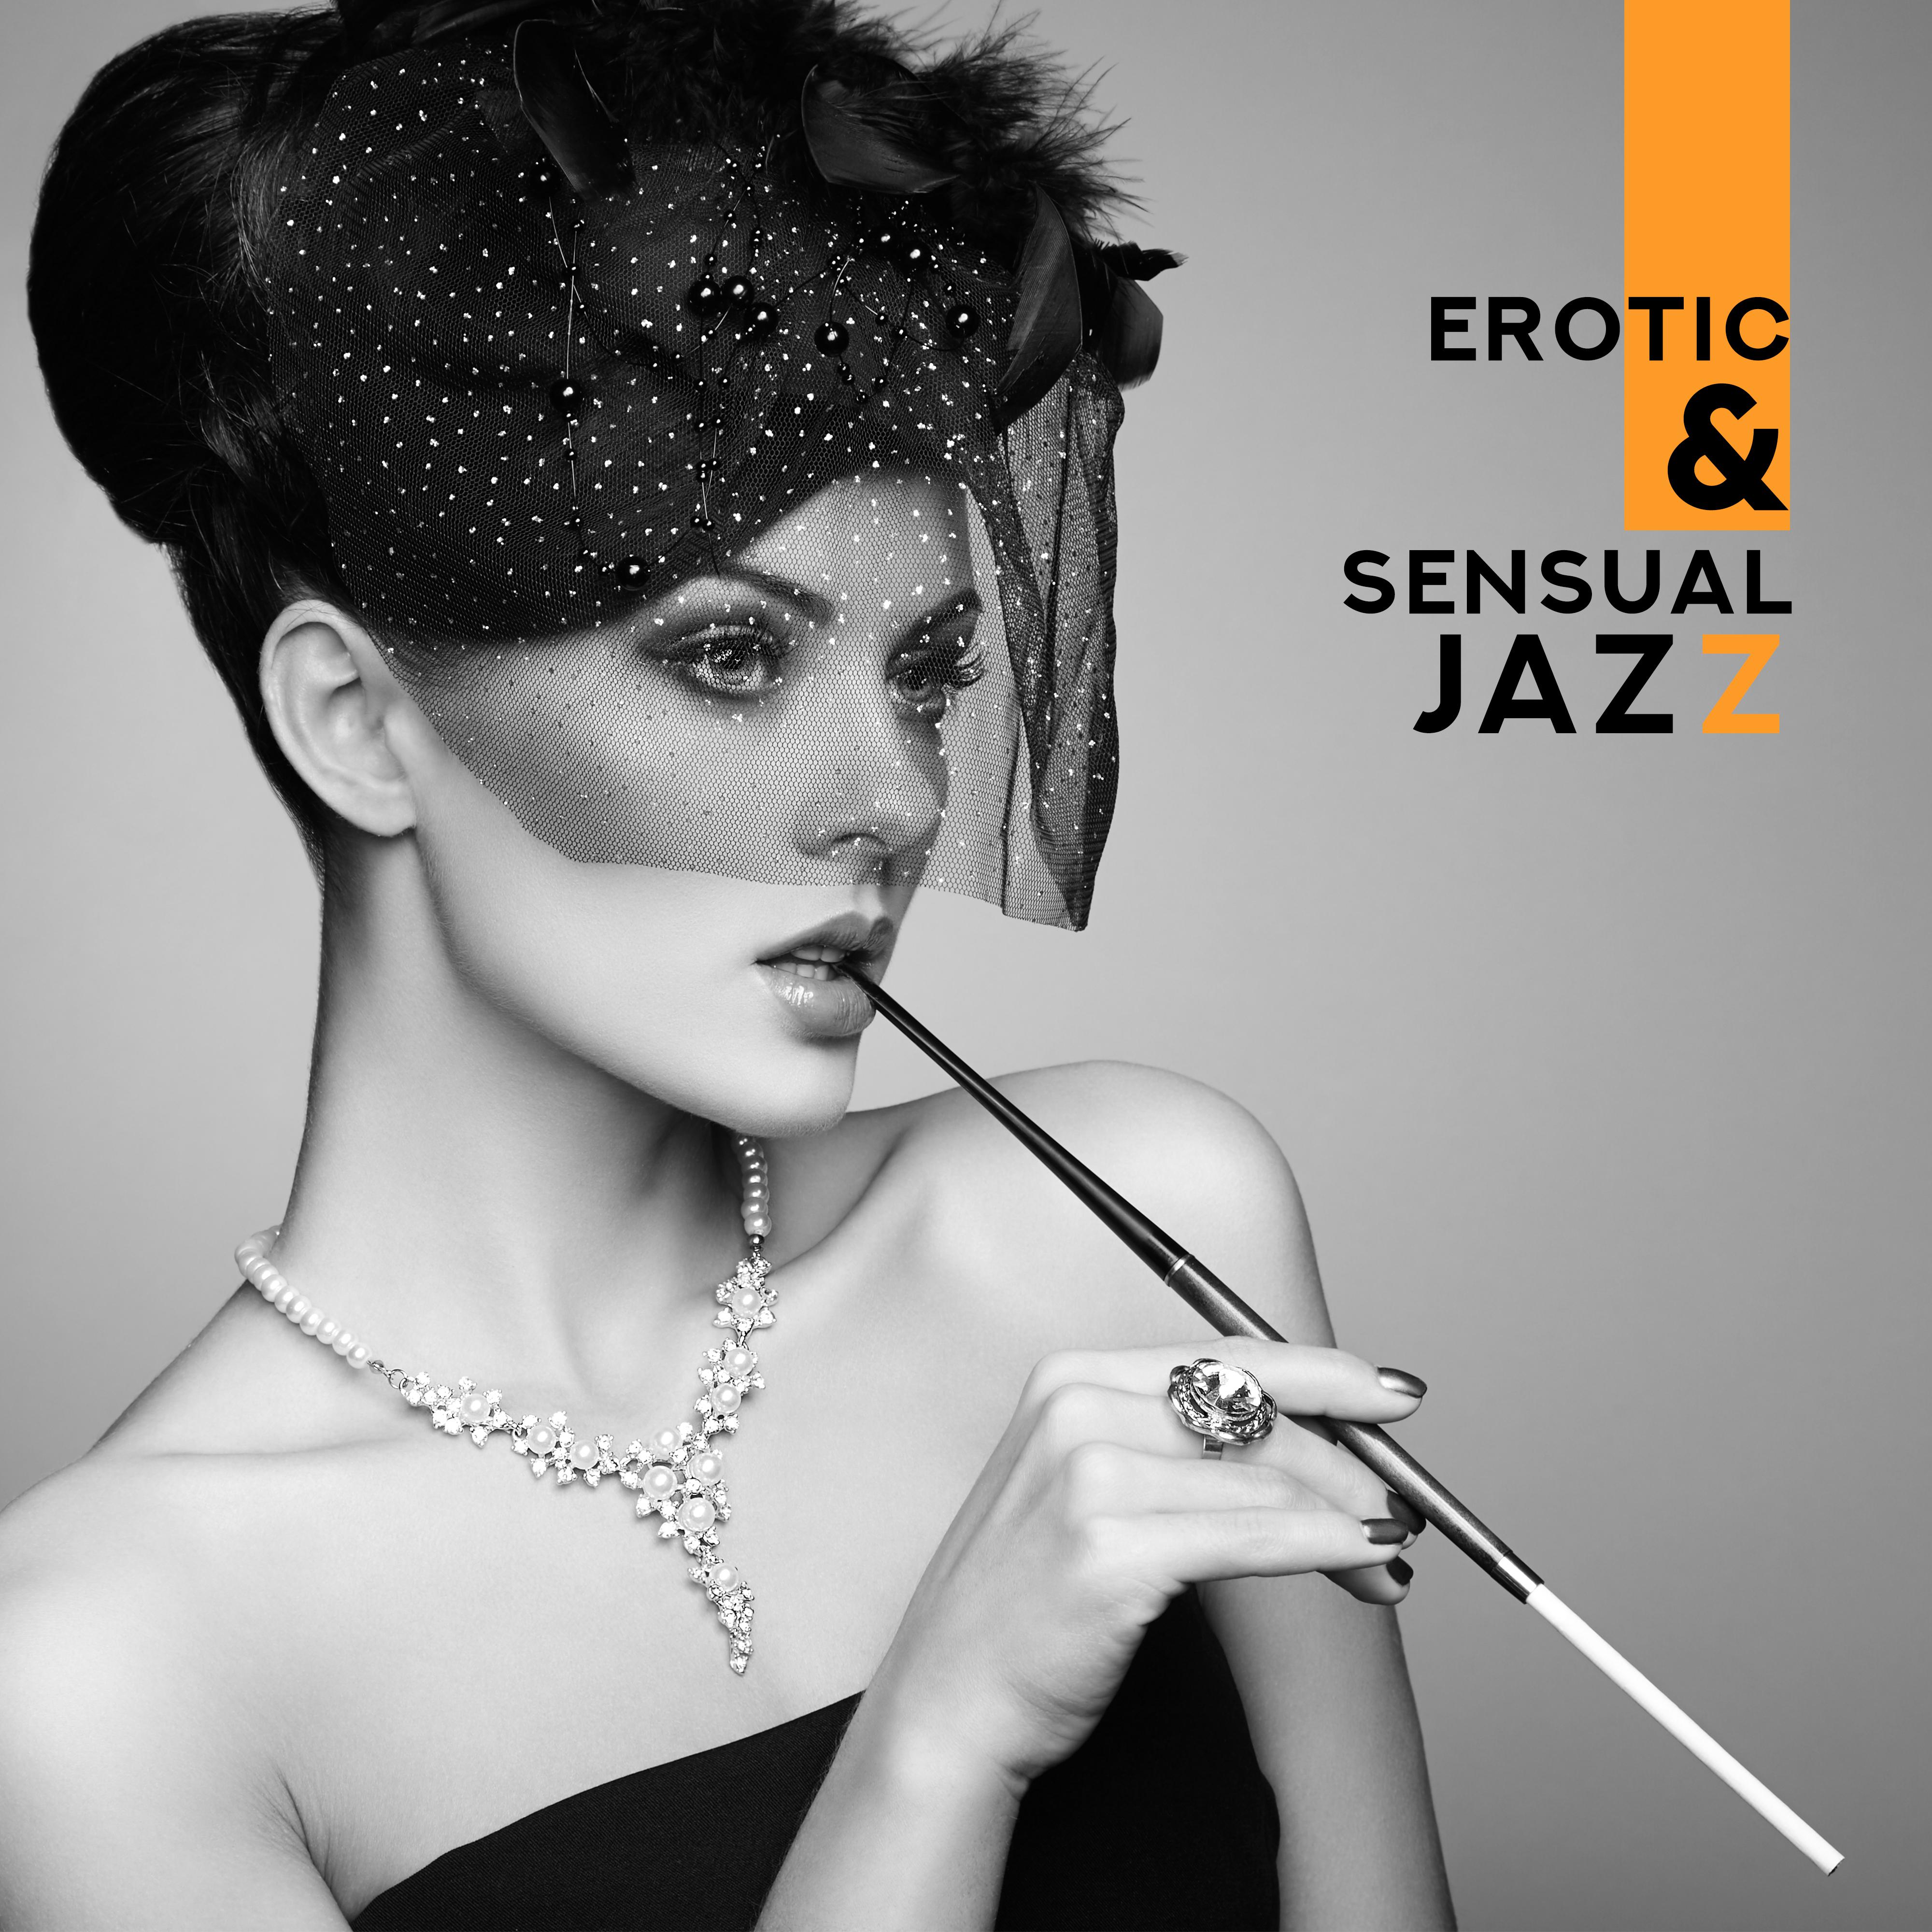 Erotic & Sensual Jazz: Perfect Background Relaxing Jazz Music for Intimate Moments